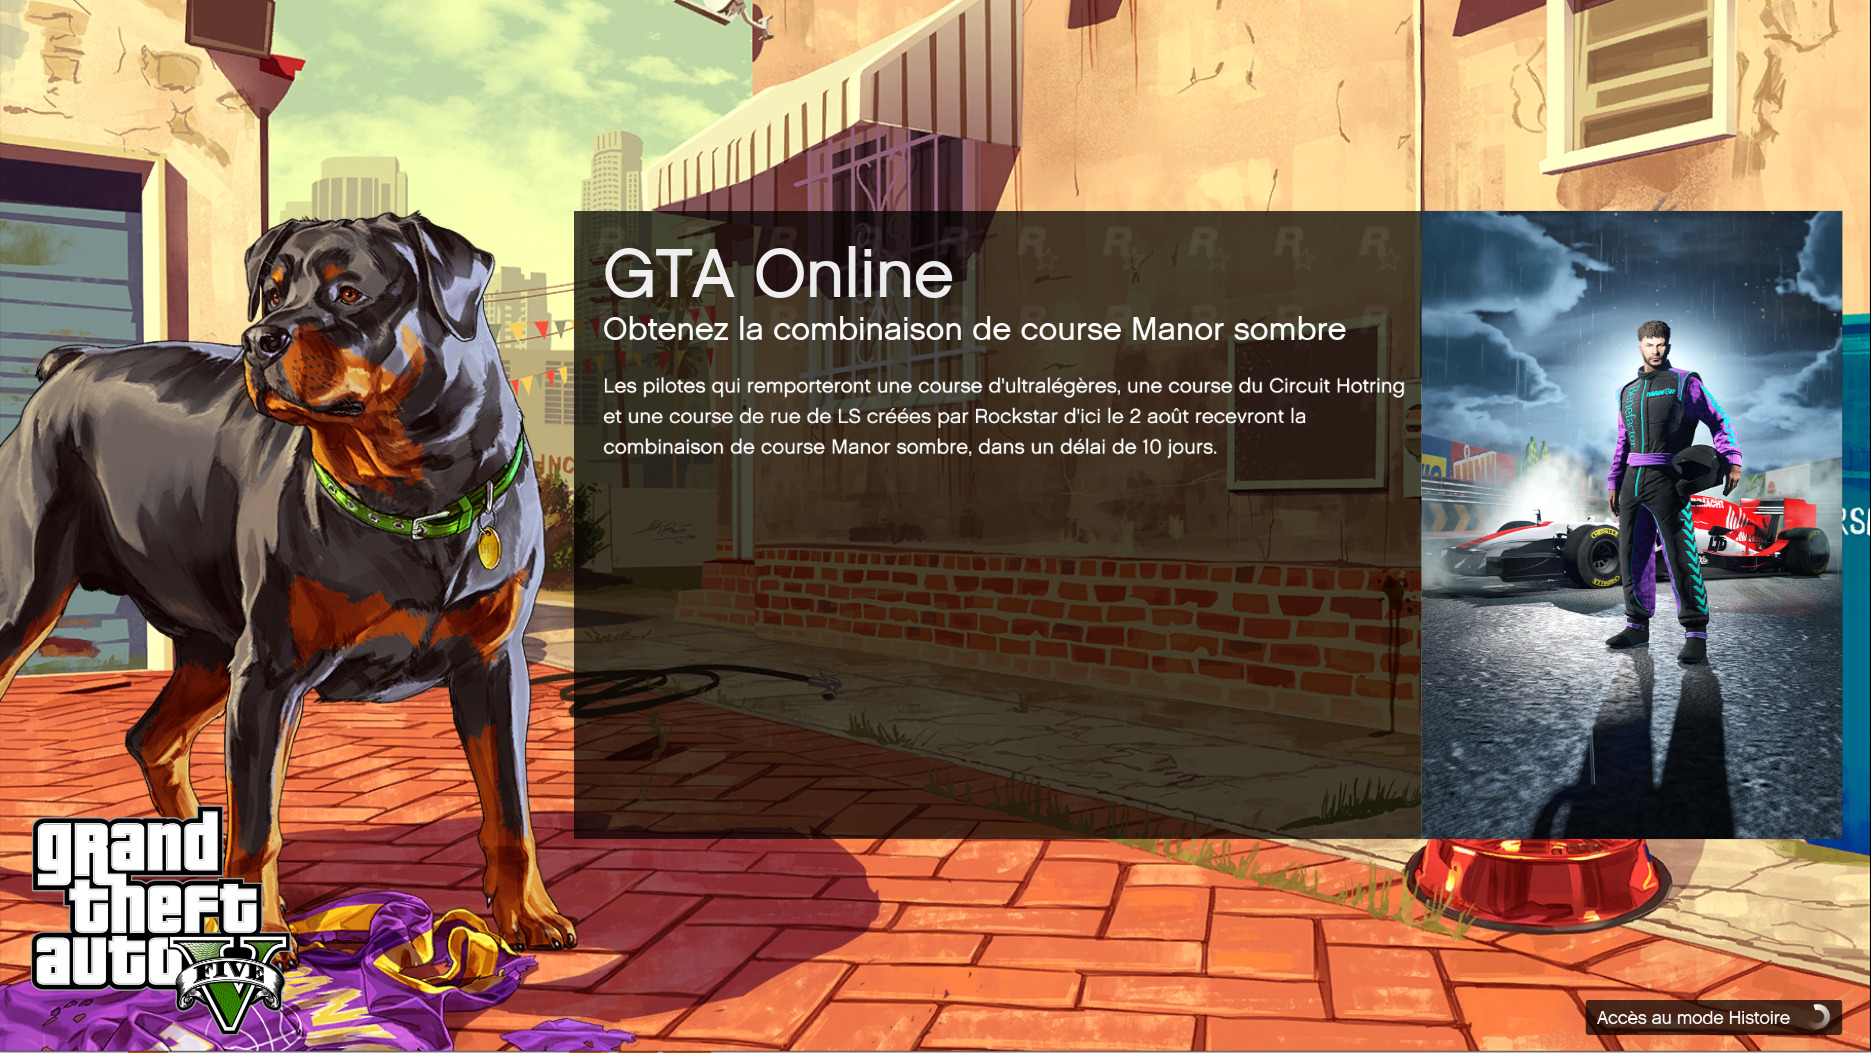 Launch GTA 5 to check if the the language change you made in Epic Games worked. 